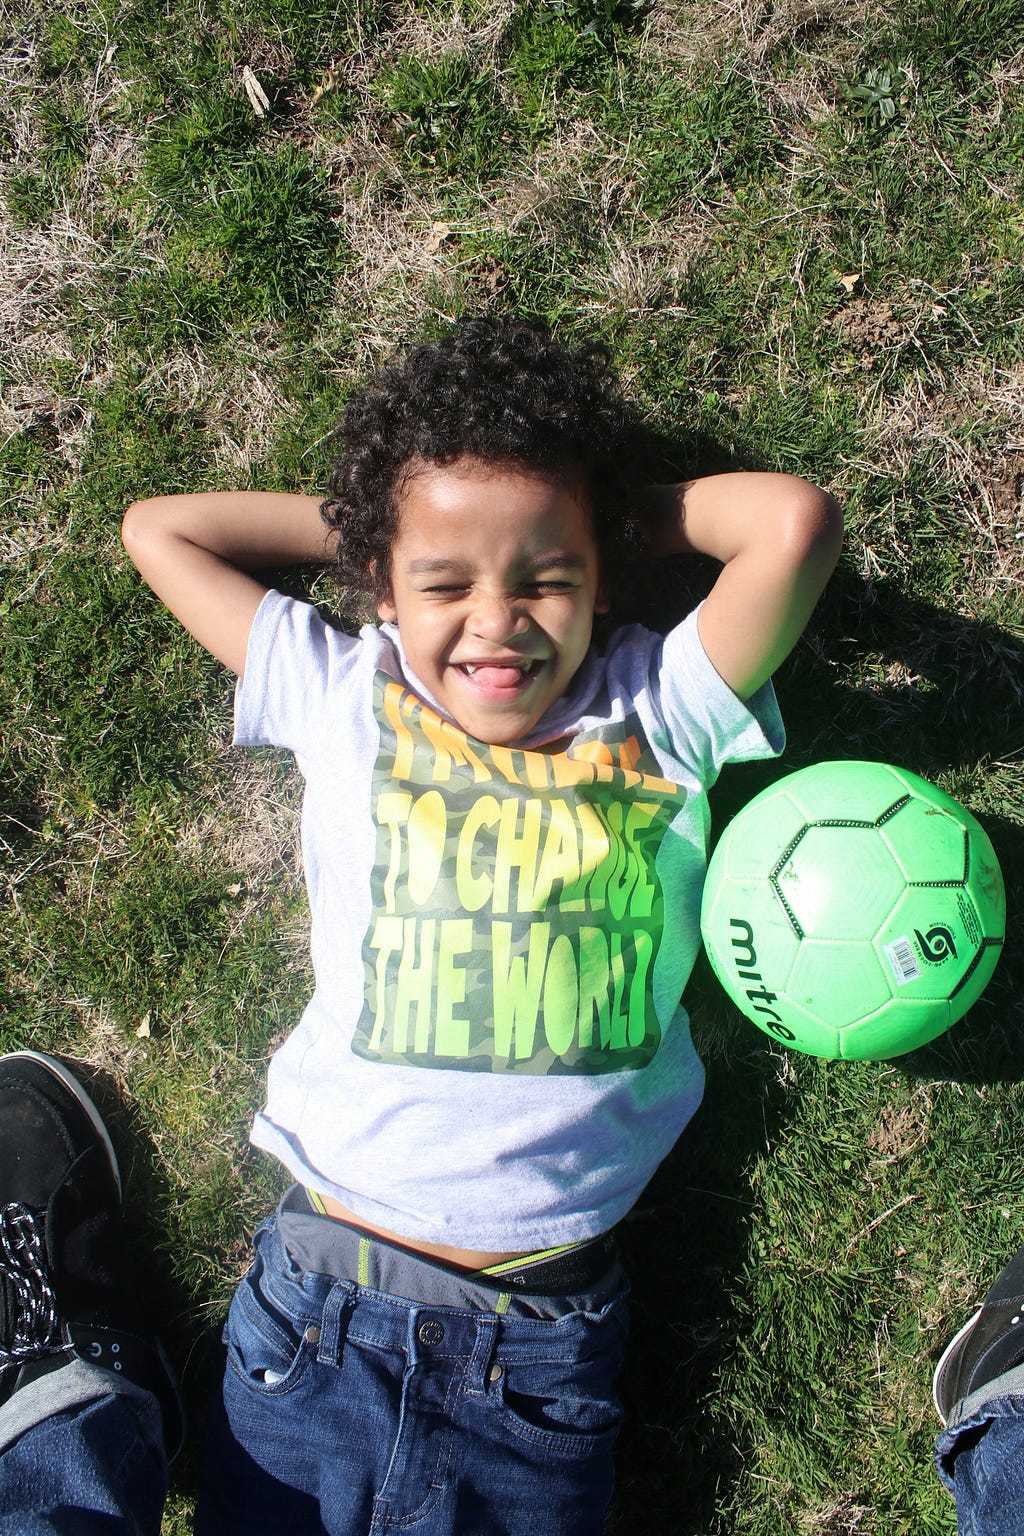 A smiling kid with a soccer ball